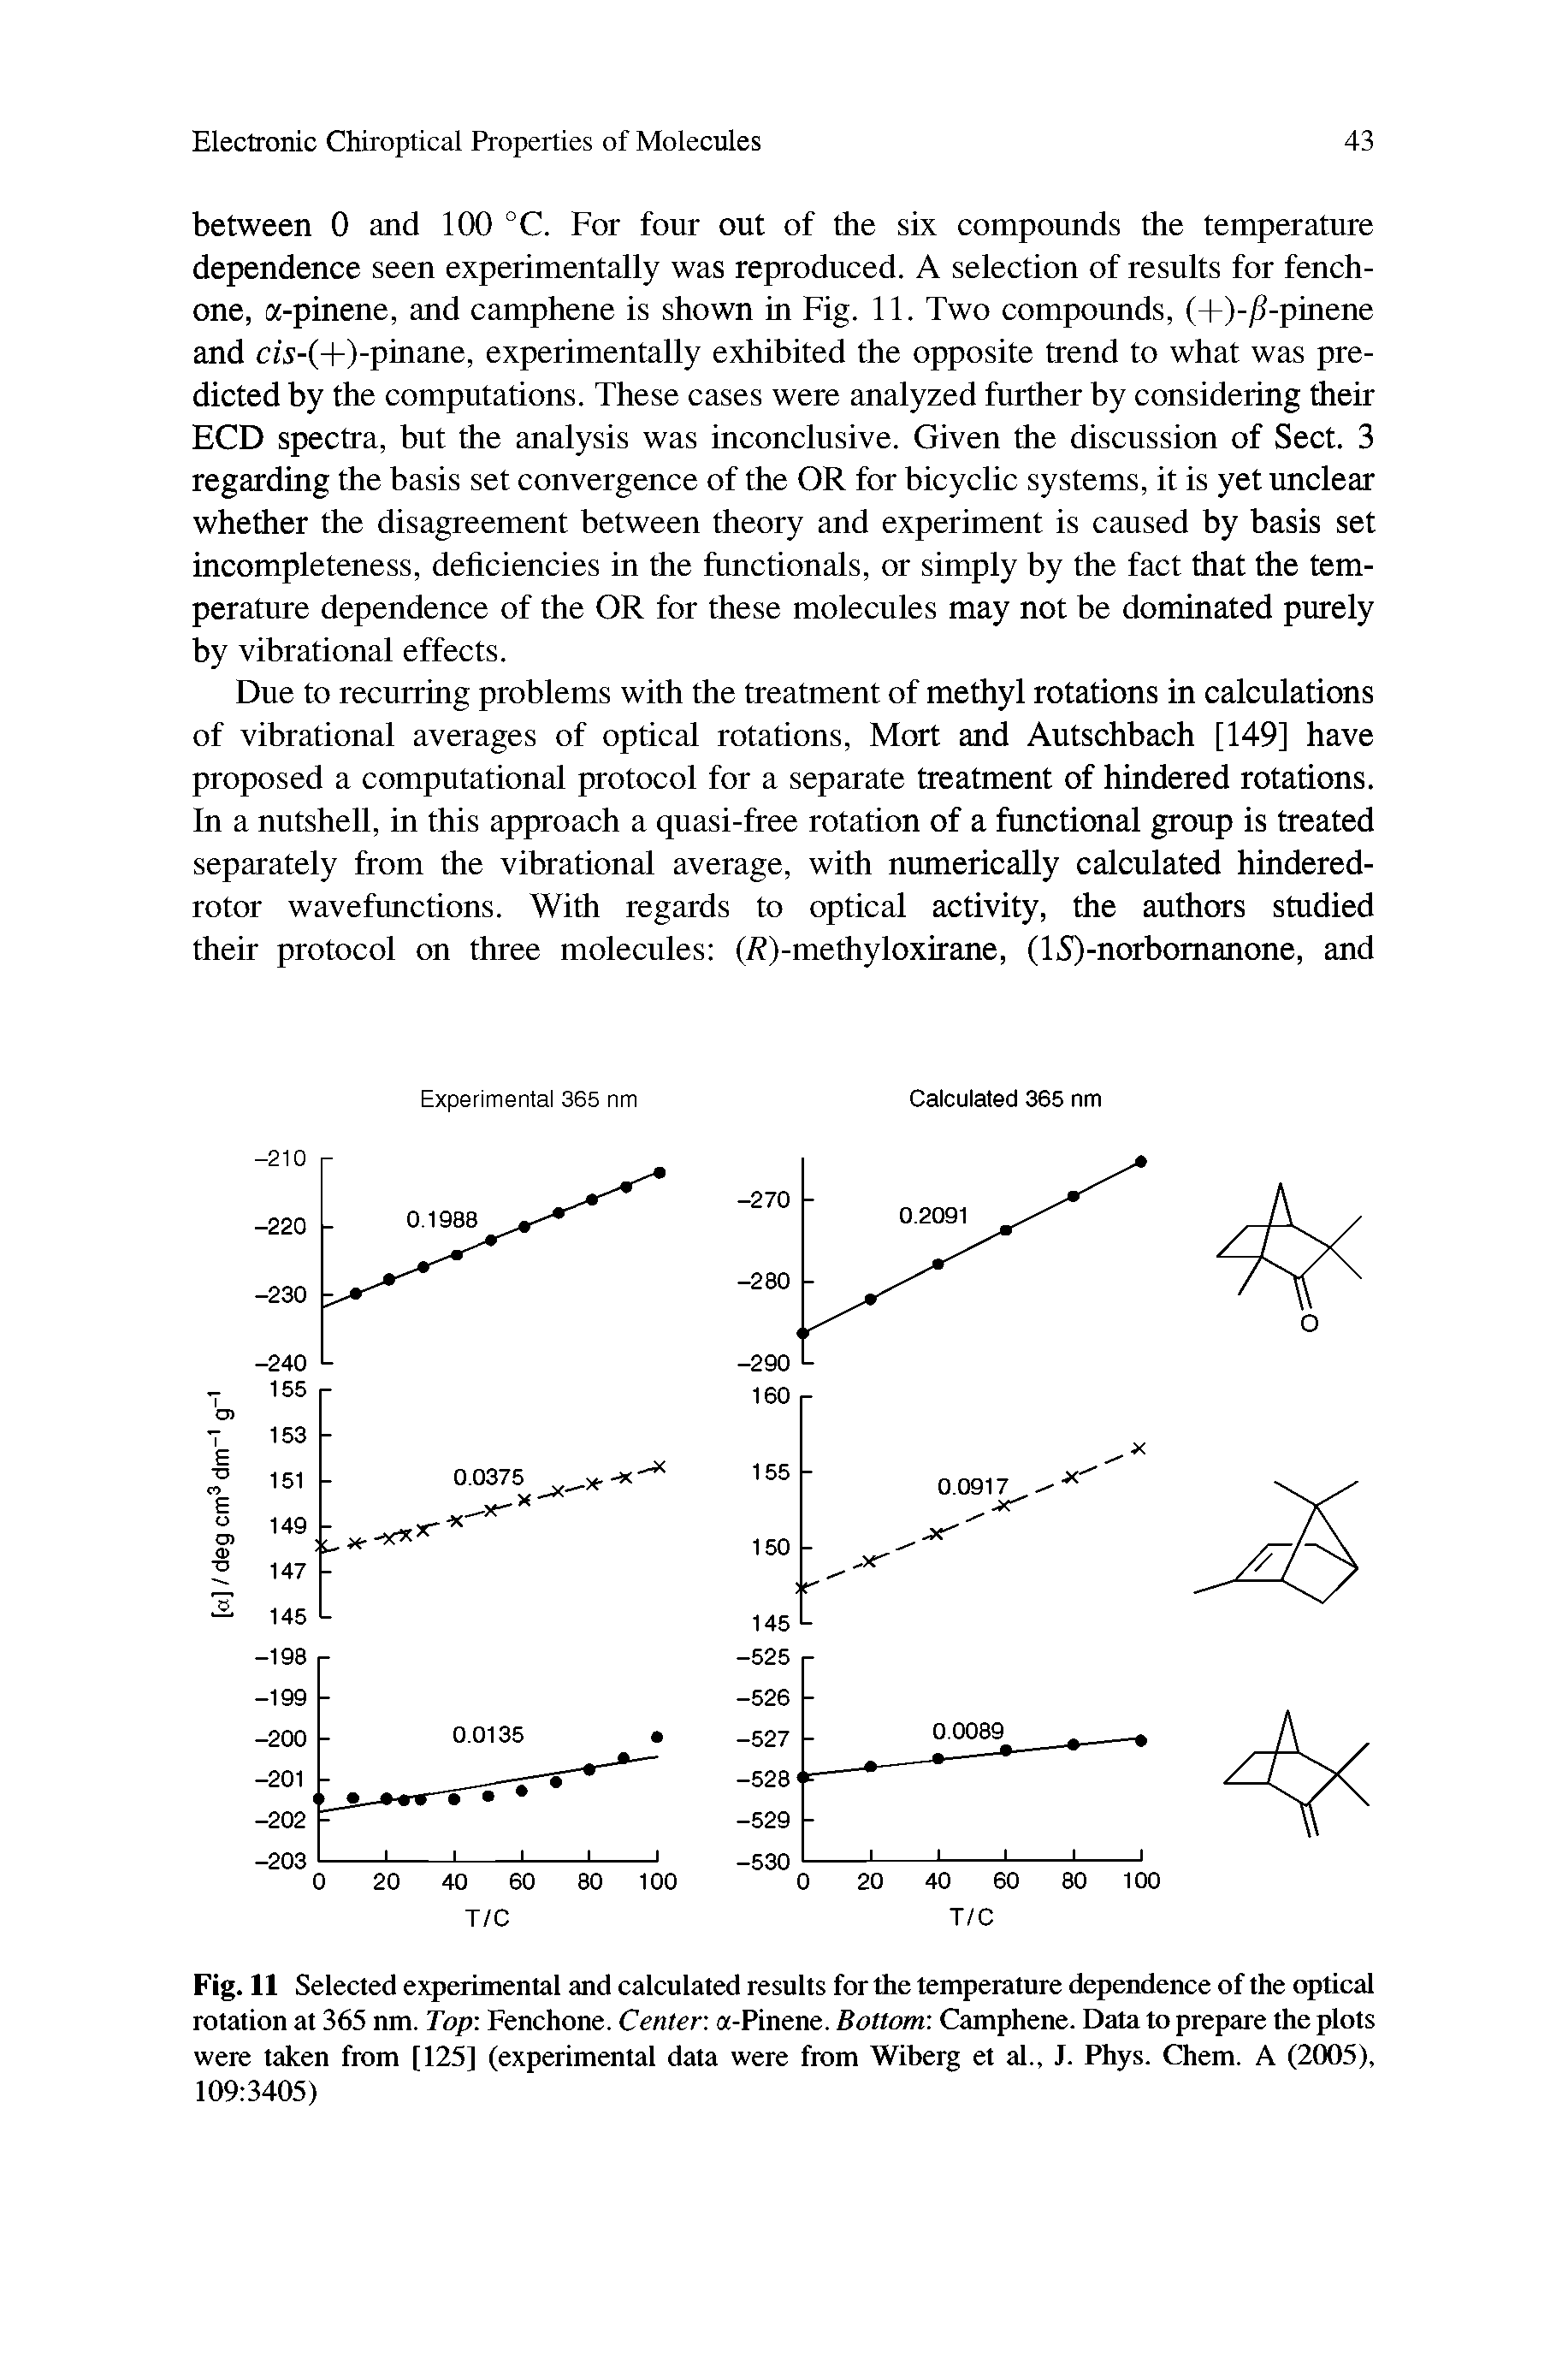 Fig. II Selected experimental and calculated results for the temperature dependence of the optical rotation at 365 nm. Top-. Fenchone. Center a-Pinene. Bottom Camphene. Data to prepare the plots were taken from [125] (experimental data were from Wiberg et al., J. Phys. Chem. A (2005), 109 3405)...